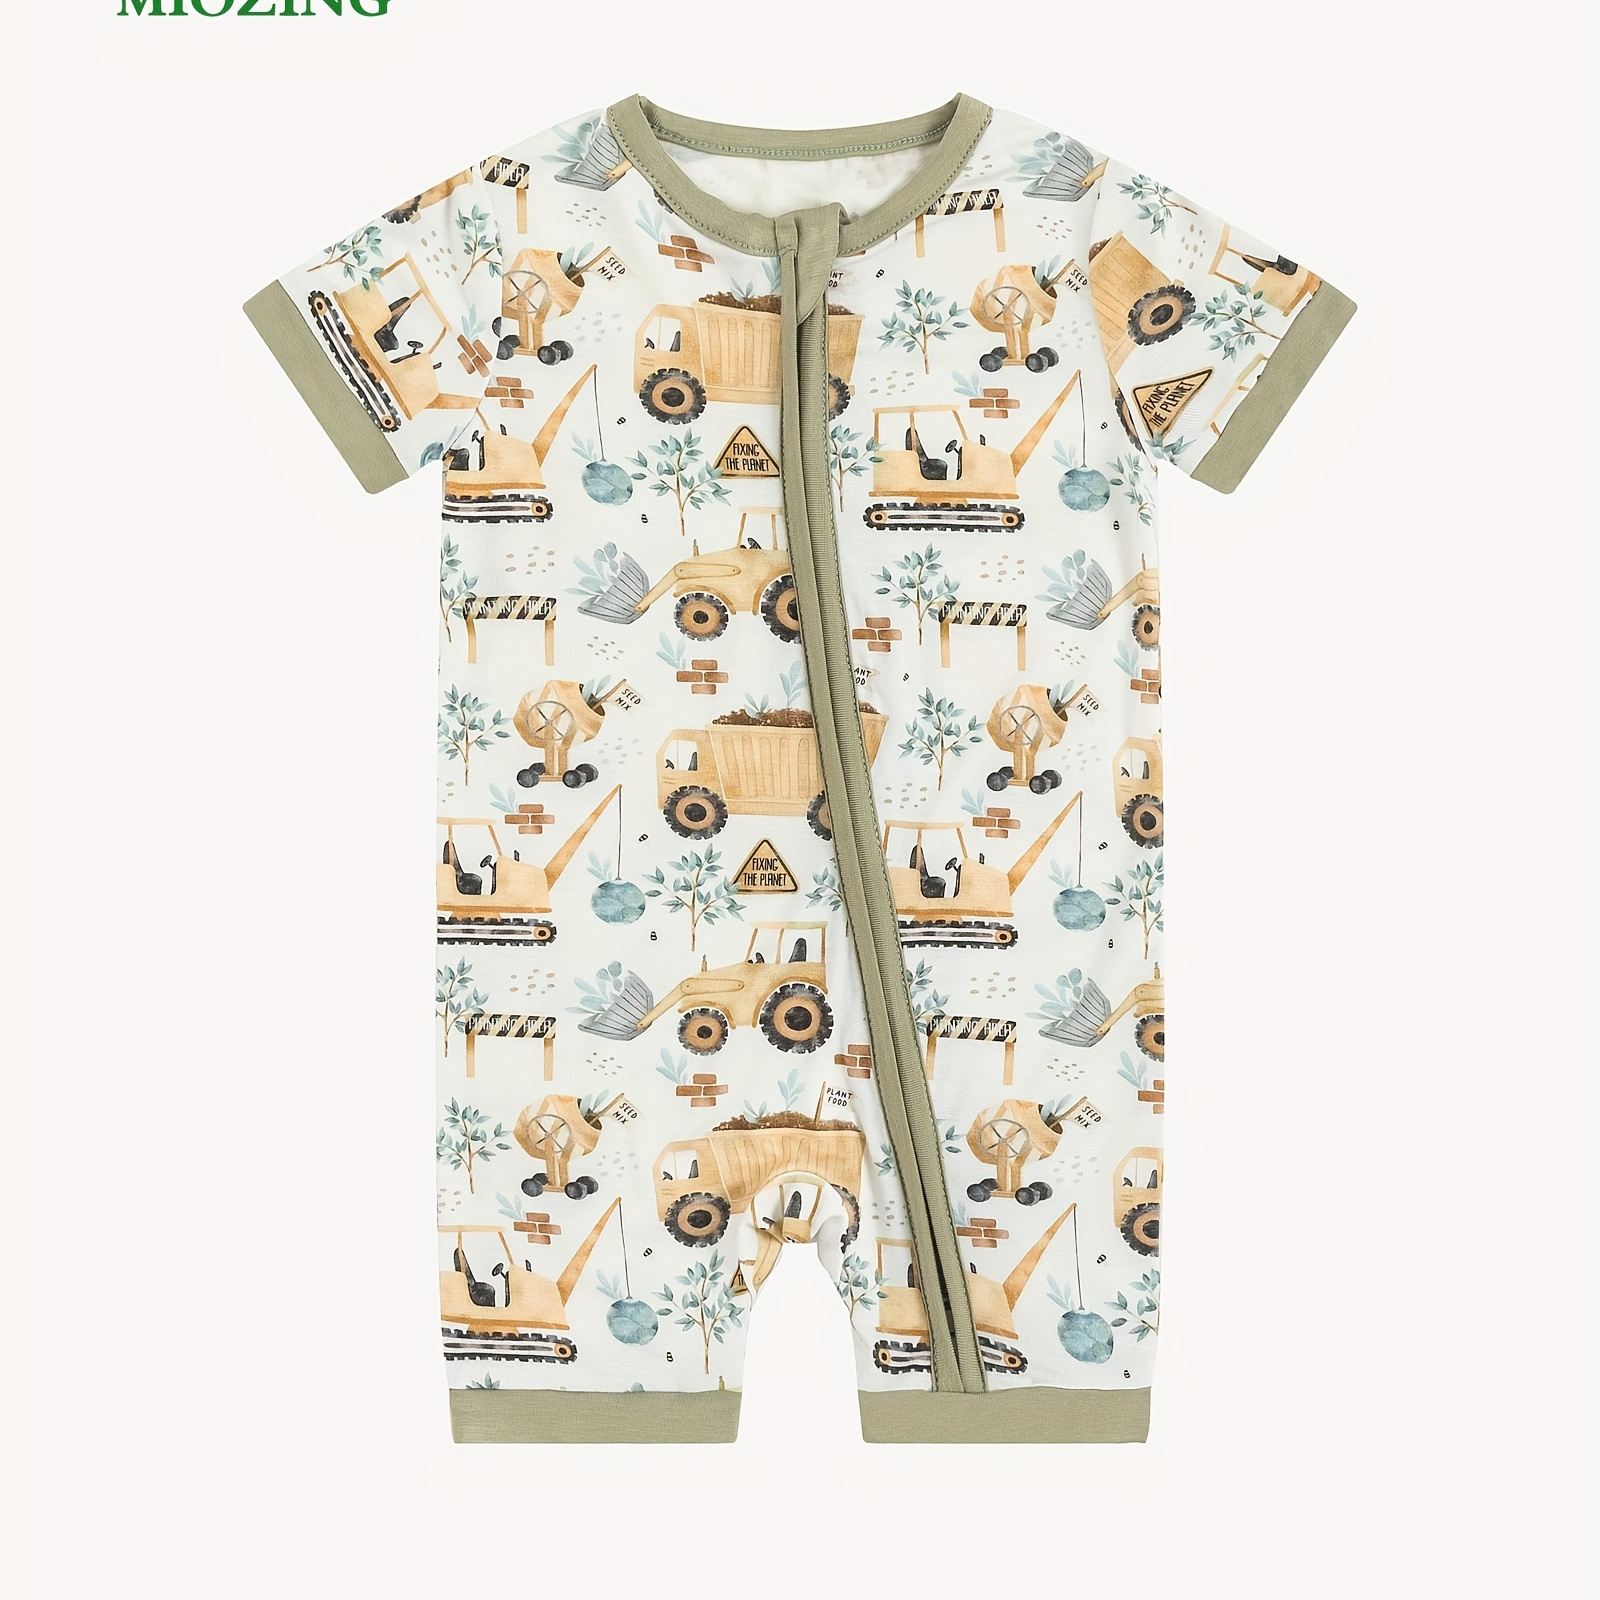 

Baby Boy's Bamboo Fiber Short Sleeve Zipper Romper, Cute Excavator Print, Soft Fabric, Infant Onesie Outfit For Summer